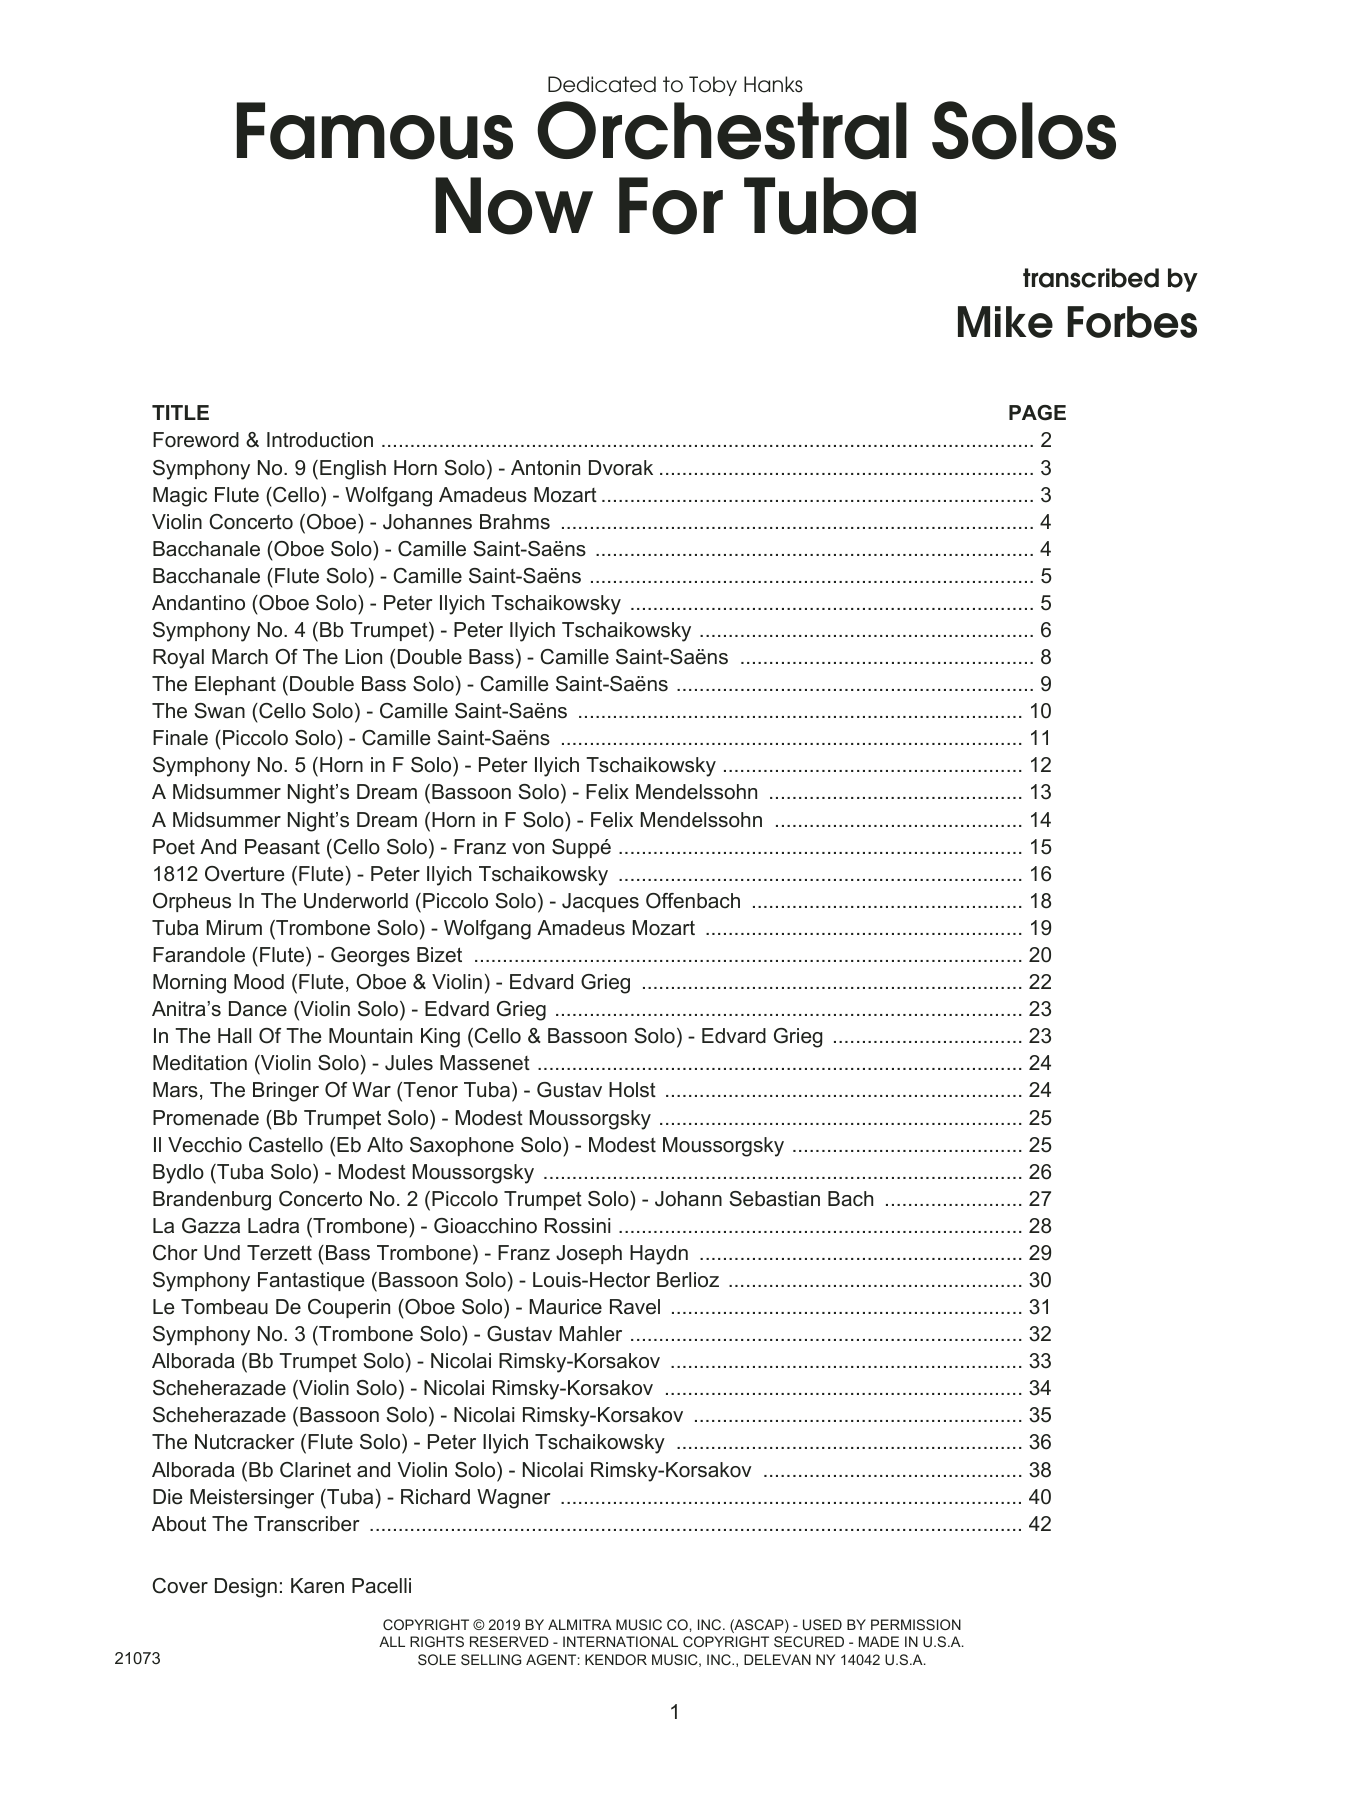 Download Mike Forbes Famous Orchestral Solos Now For Tuba Sheet Music